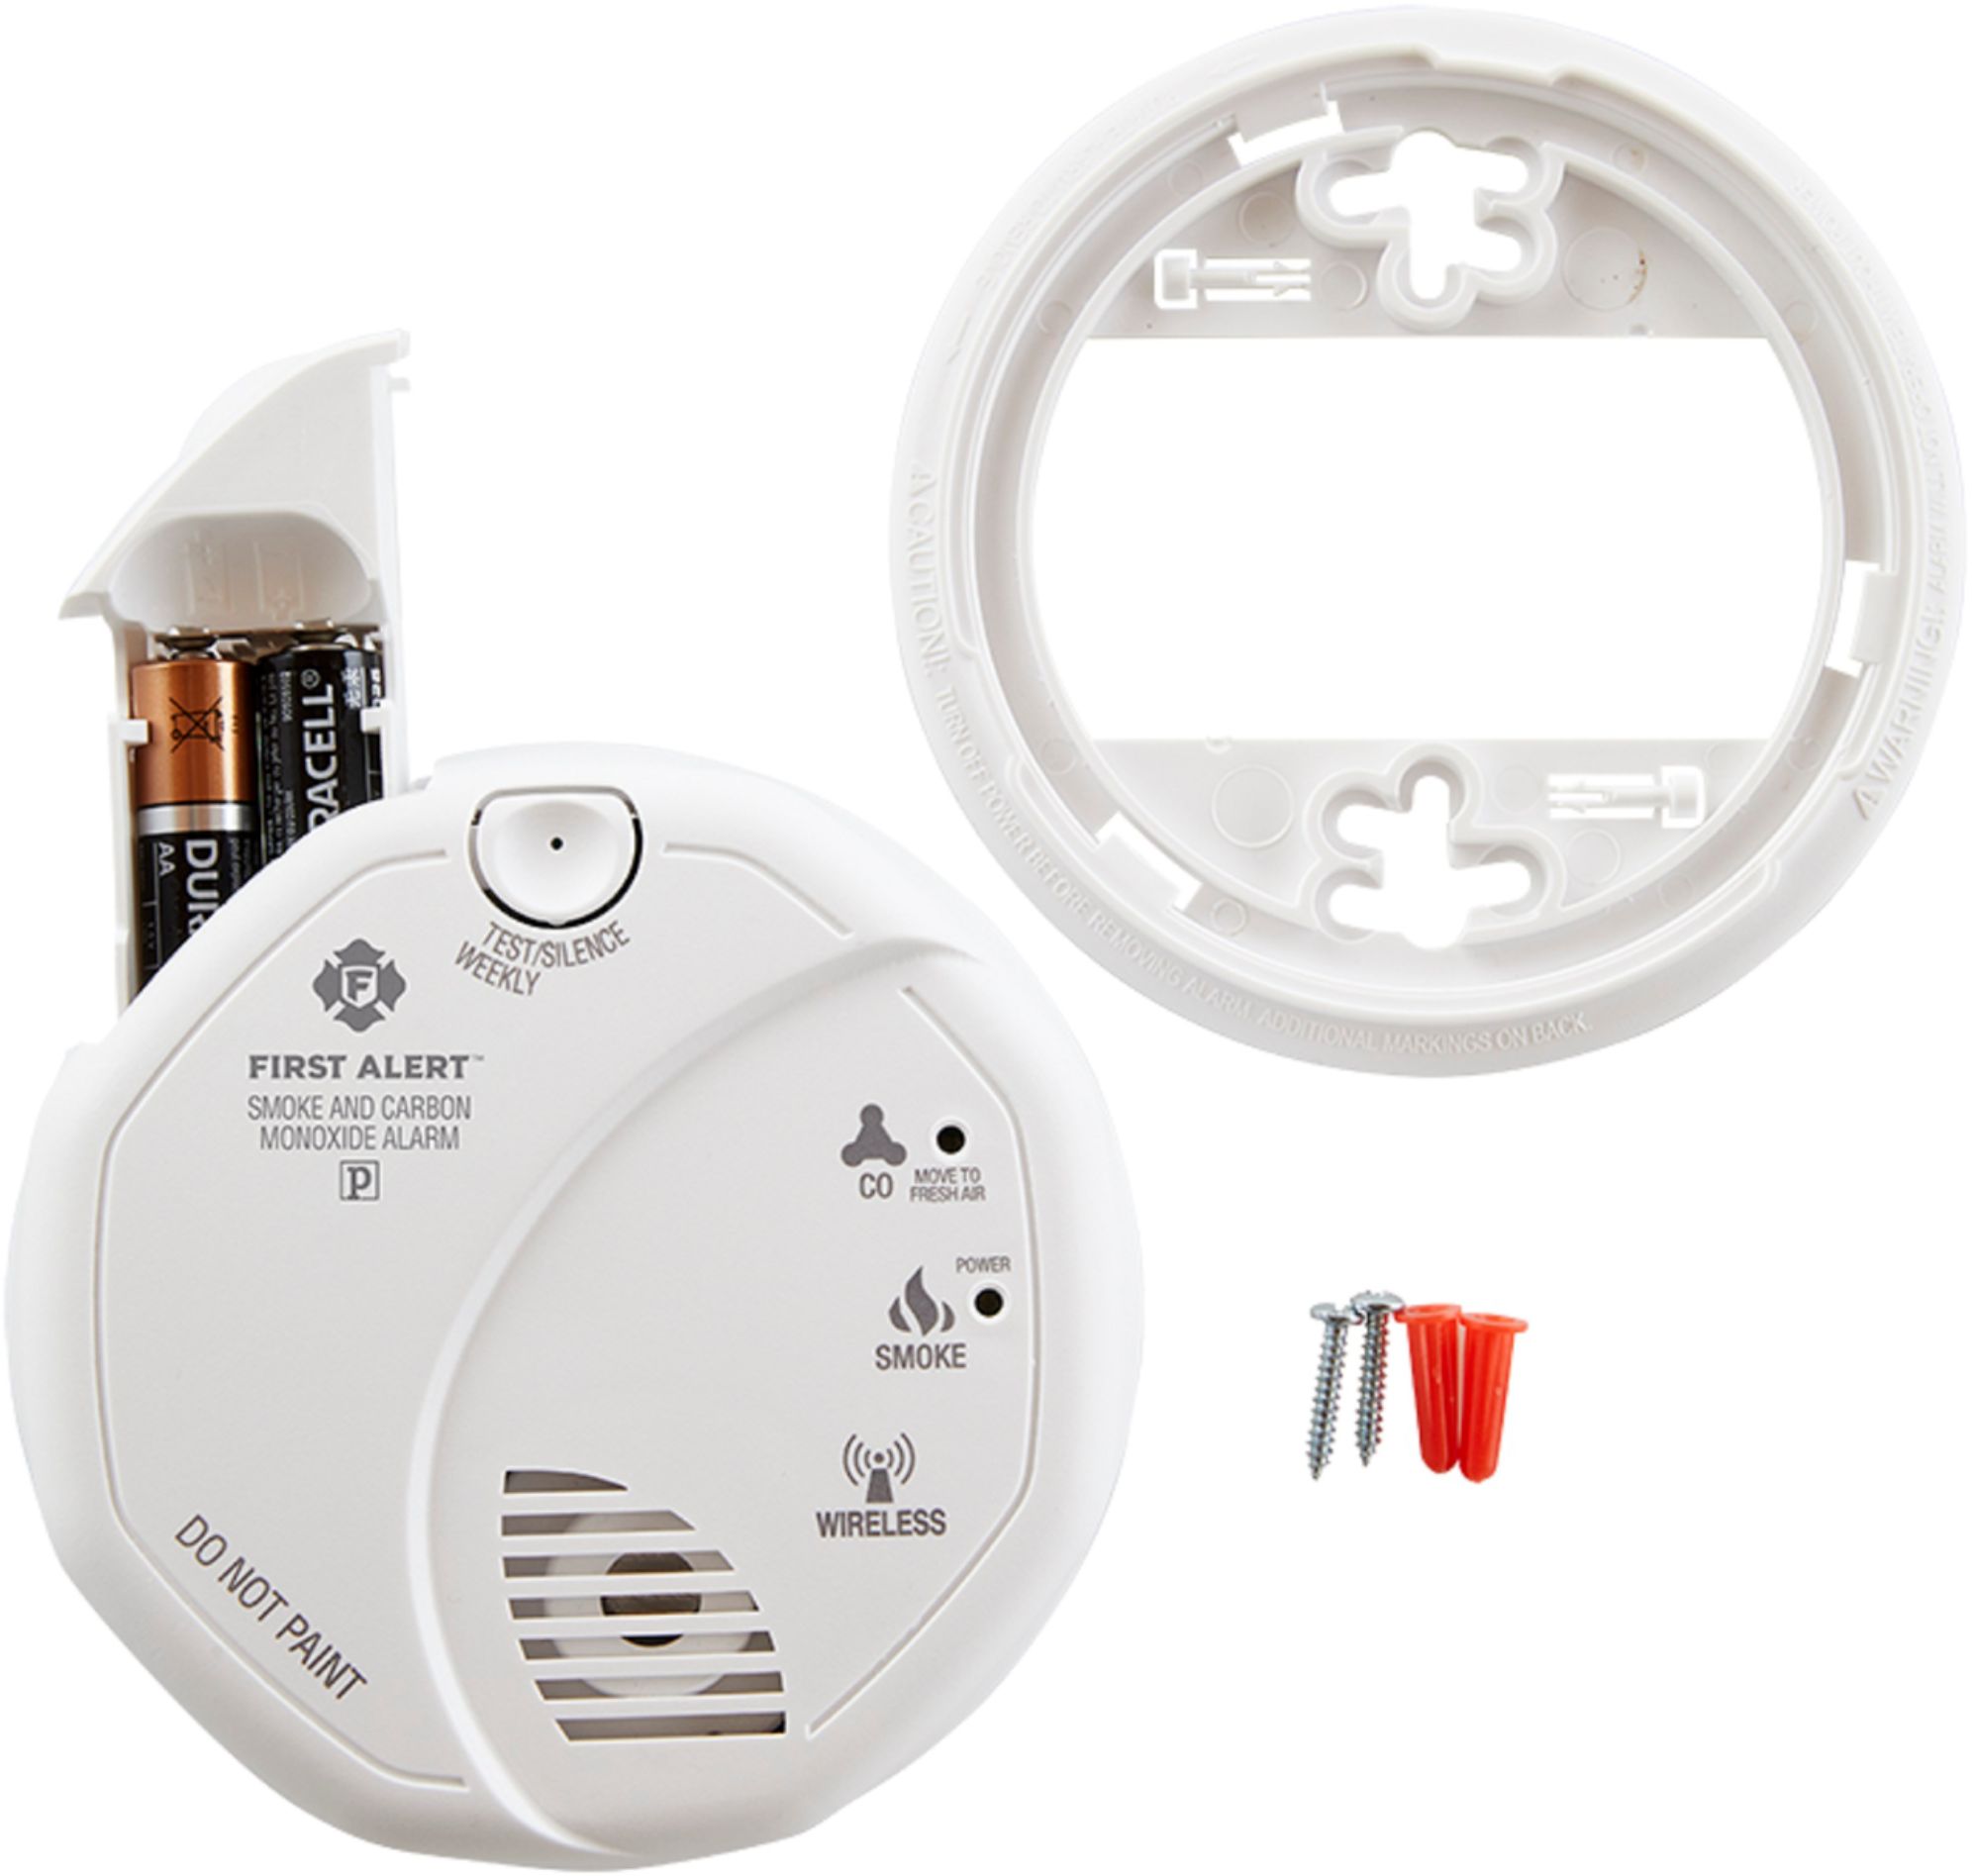 Smoke and Carbon Monoxide Alarm Works with Ring White First Alert 